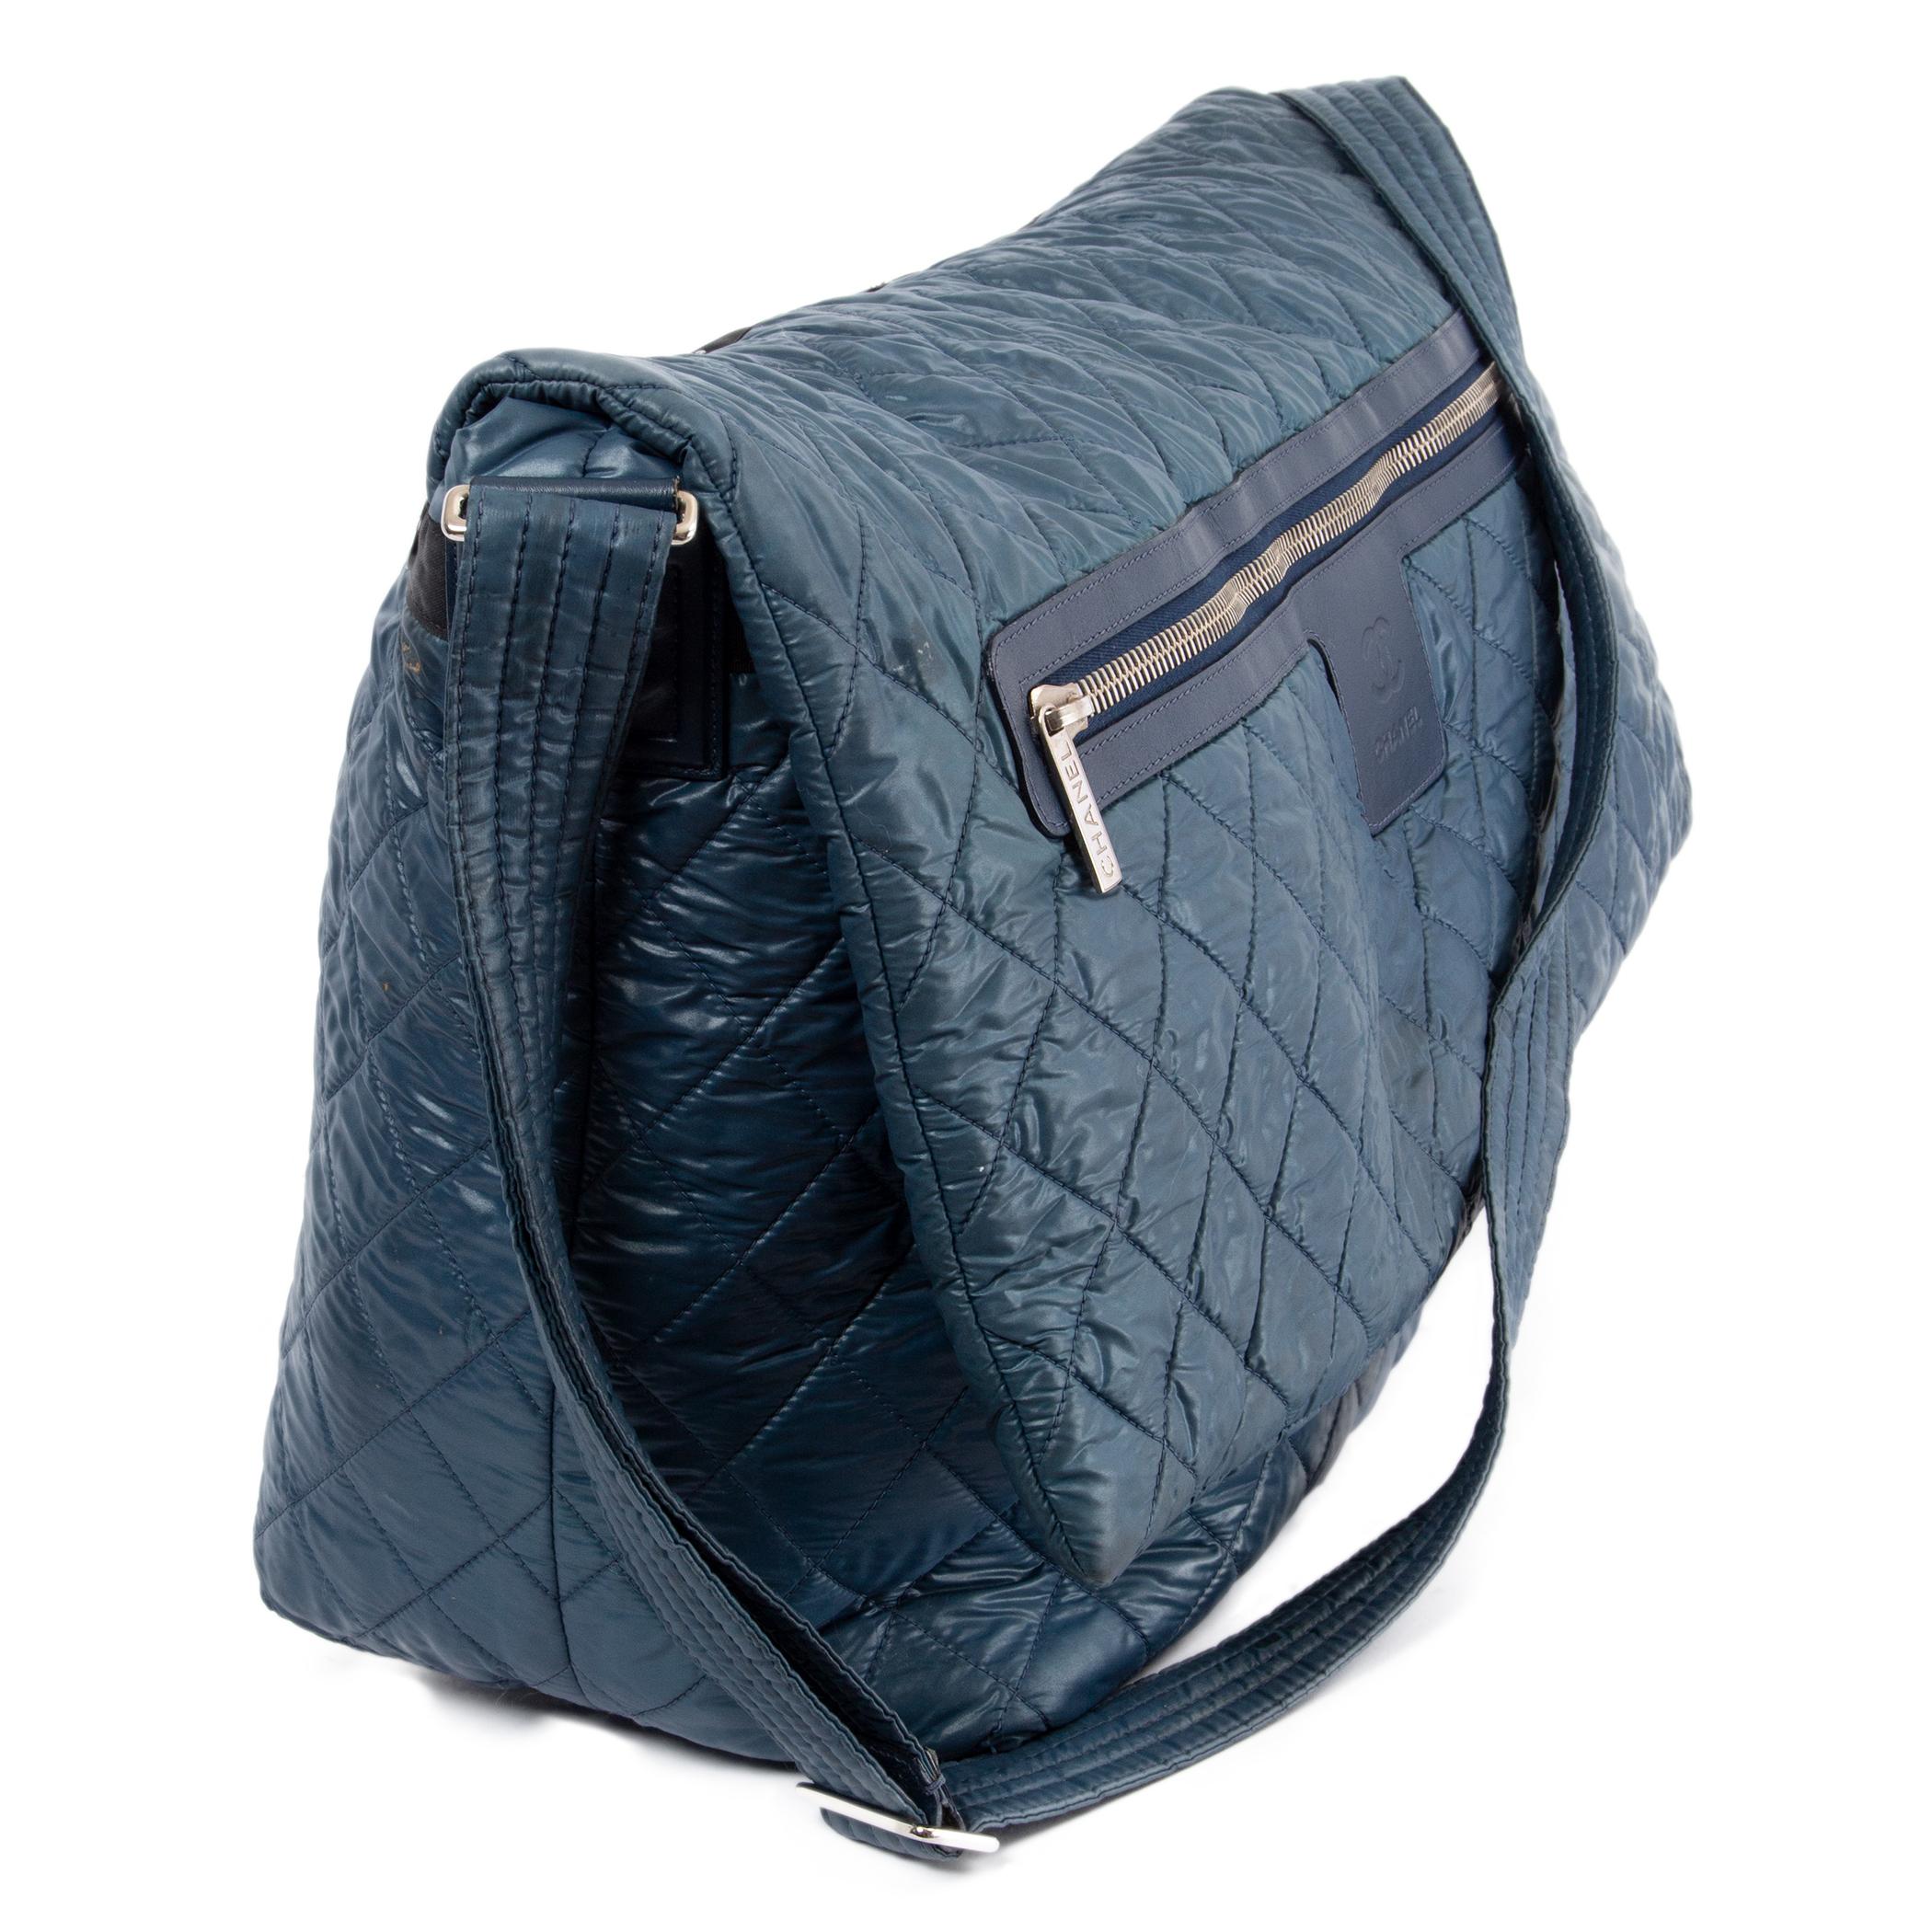 100% authentic Chanel Large Cocoon messenger bag in petrol blue nylon with leather trimming and silver-tone hardware. The design features a big zipper pocket at front and inside push-buttons. Opens with a flap to a black nylon interior. Has been